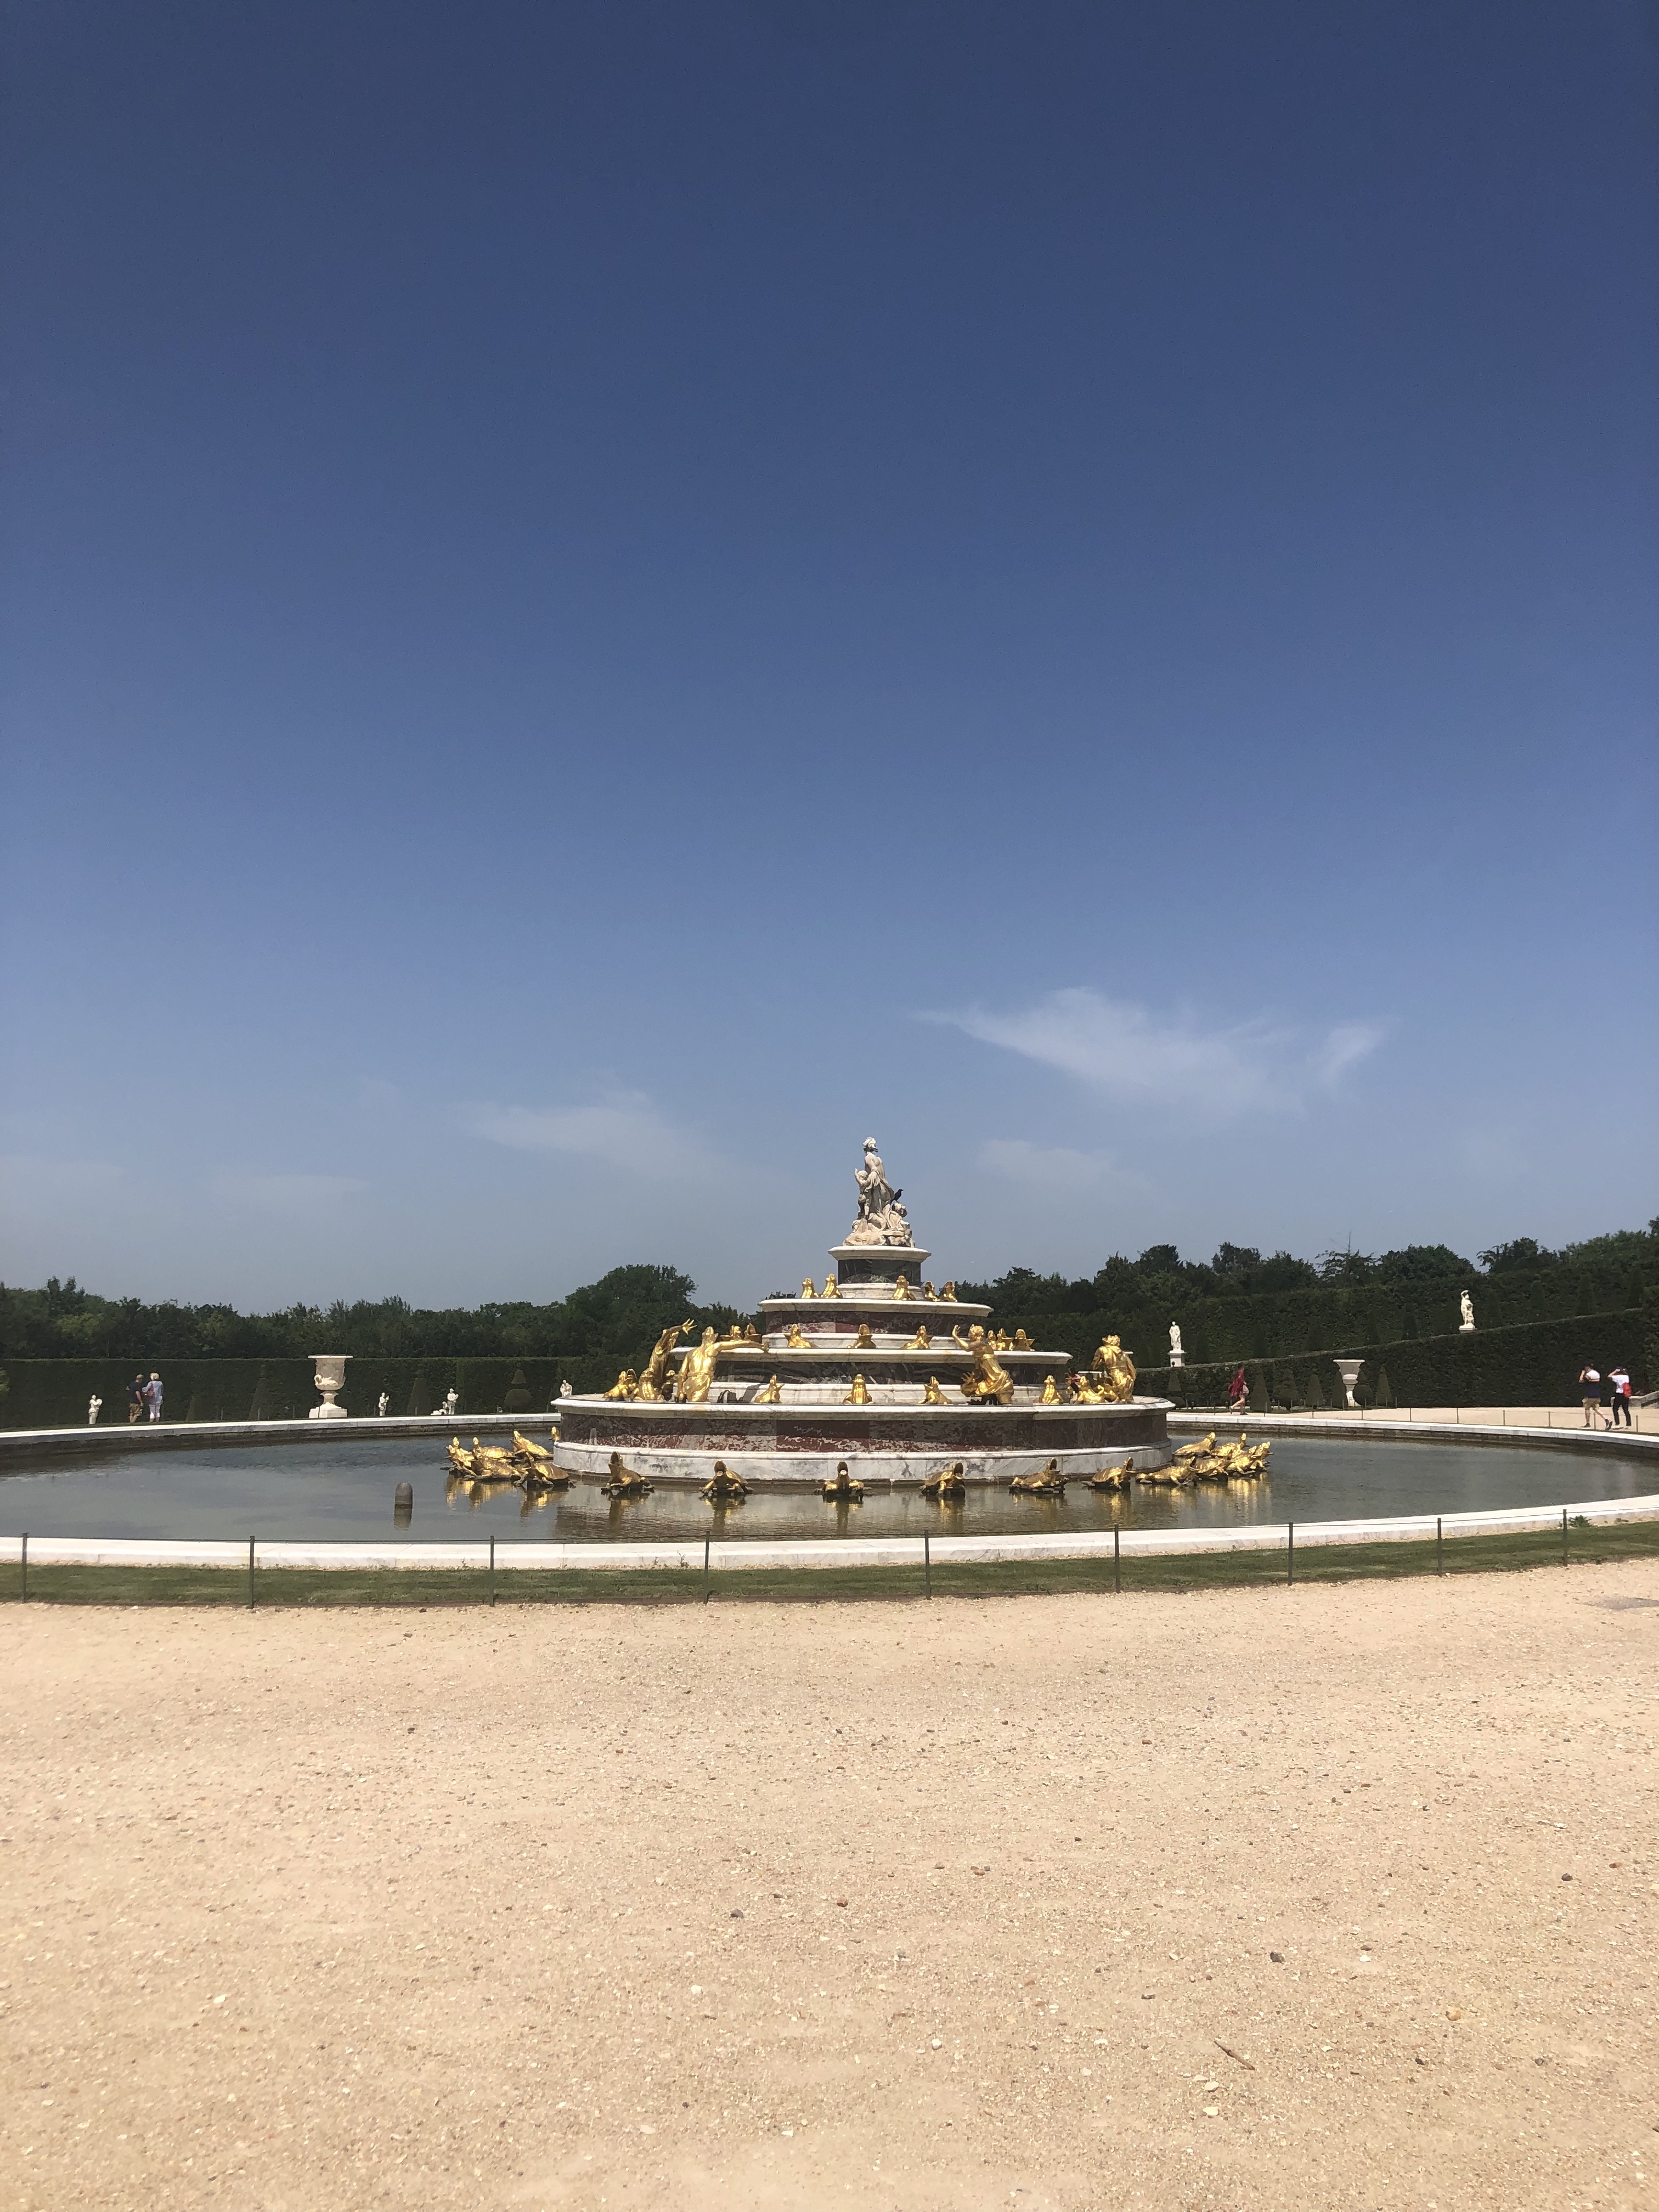 Fountain on the grounds of the Palace of Versailles